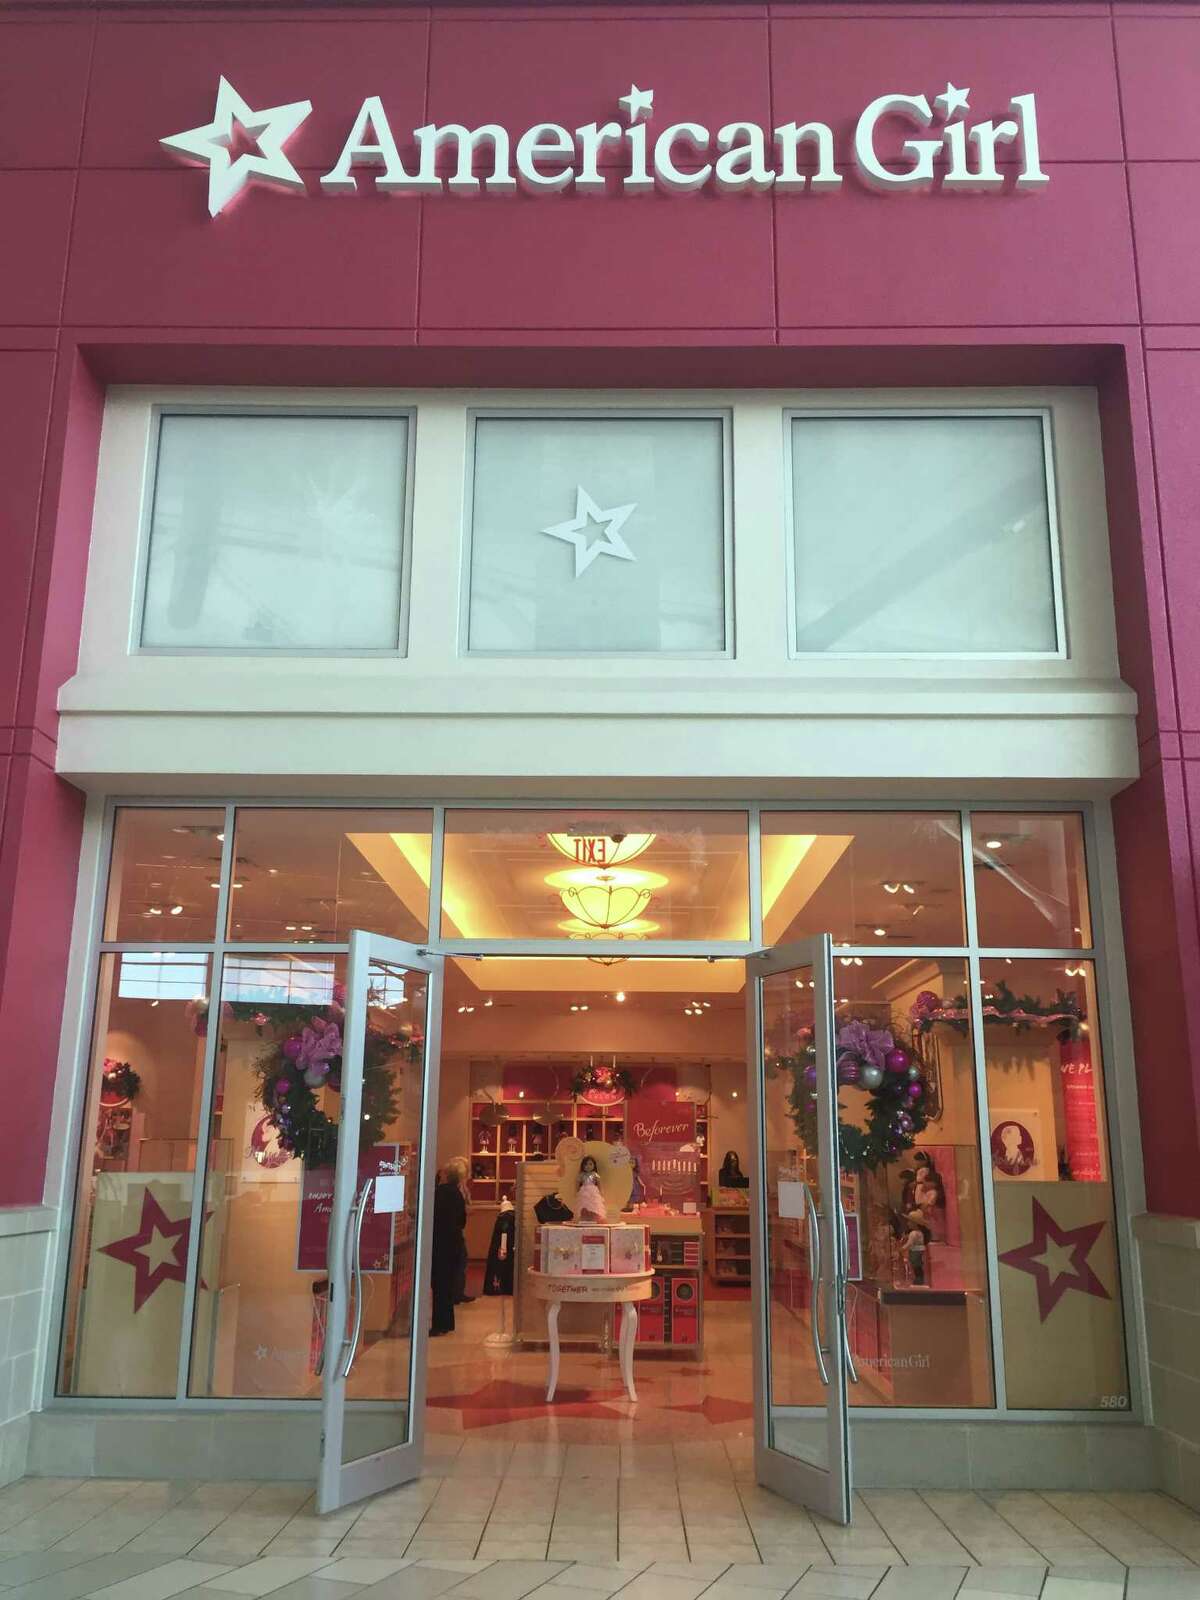 The American Girl Doll store 